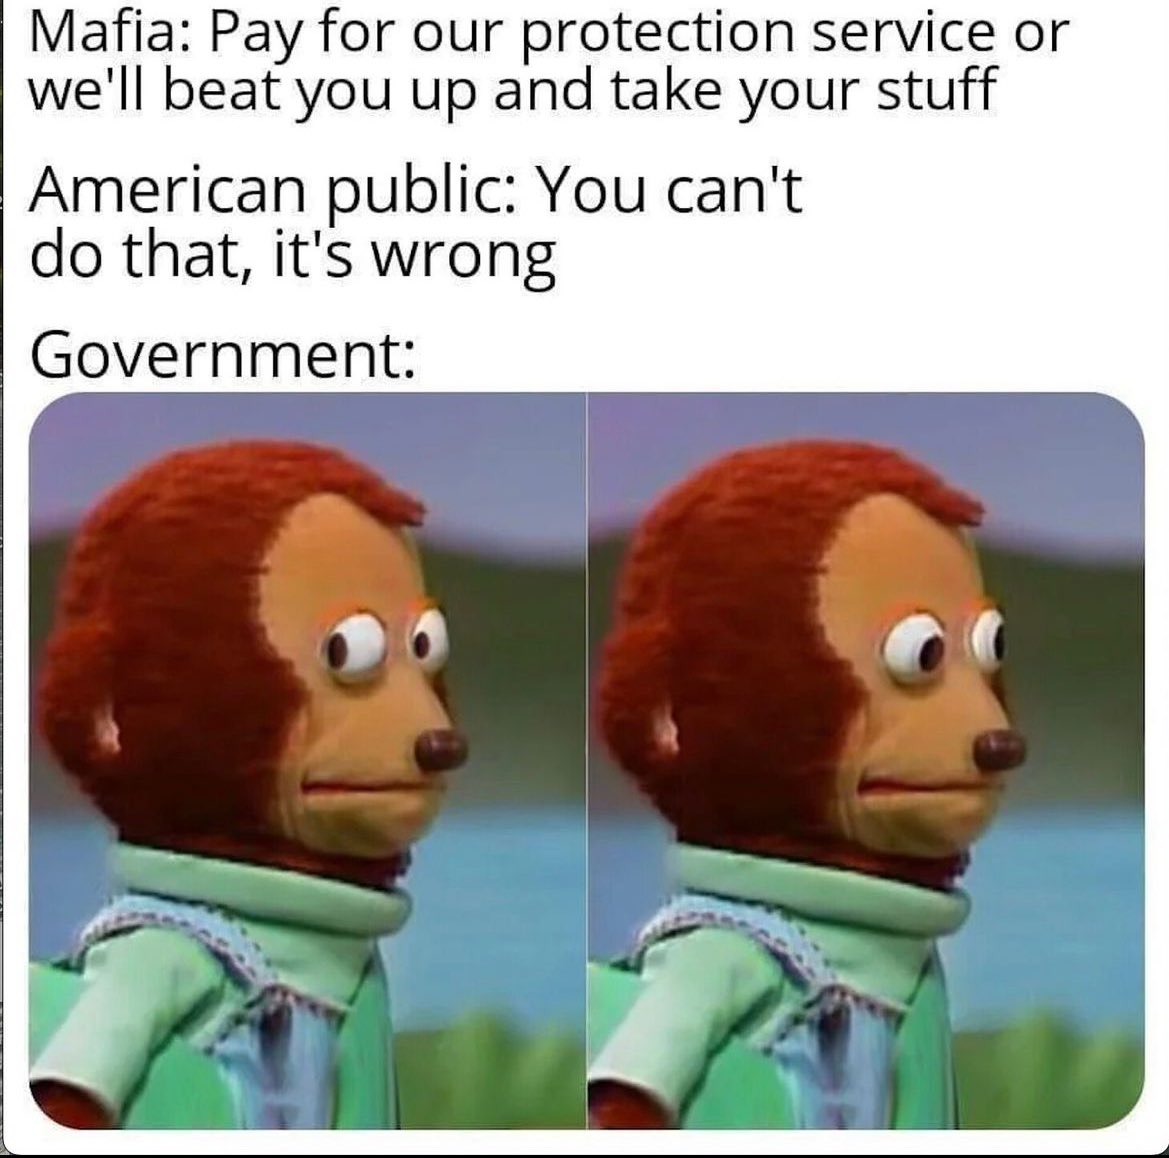 Do you think the government is like the mafia?